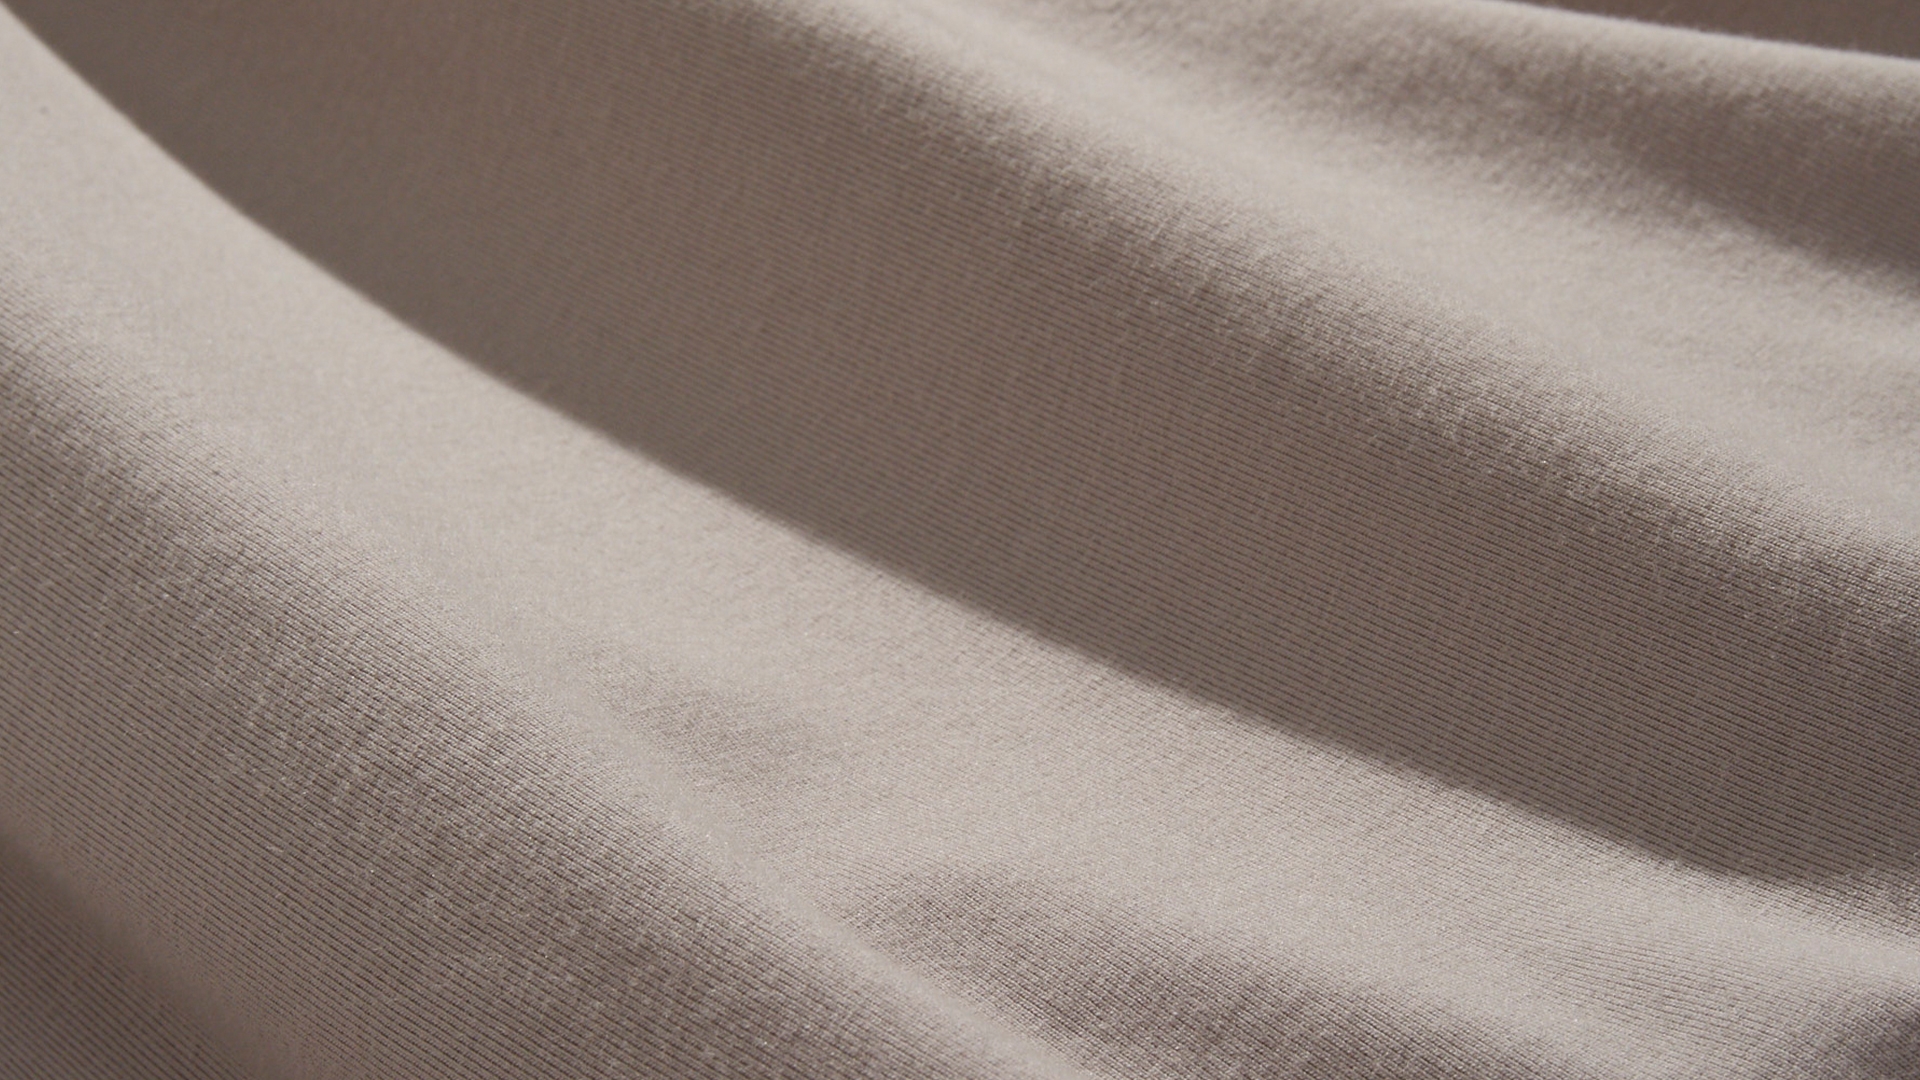 Close-up image of a light and breathable off-white knit fabric.